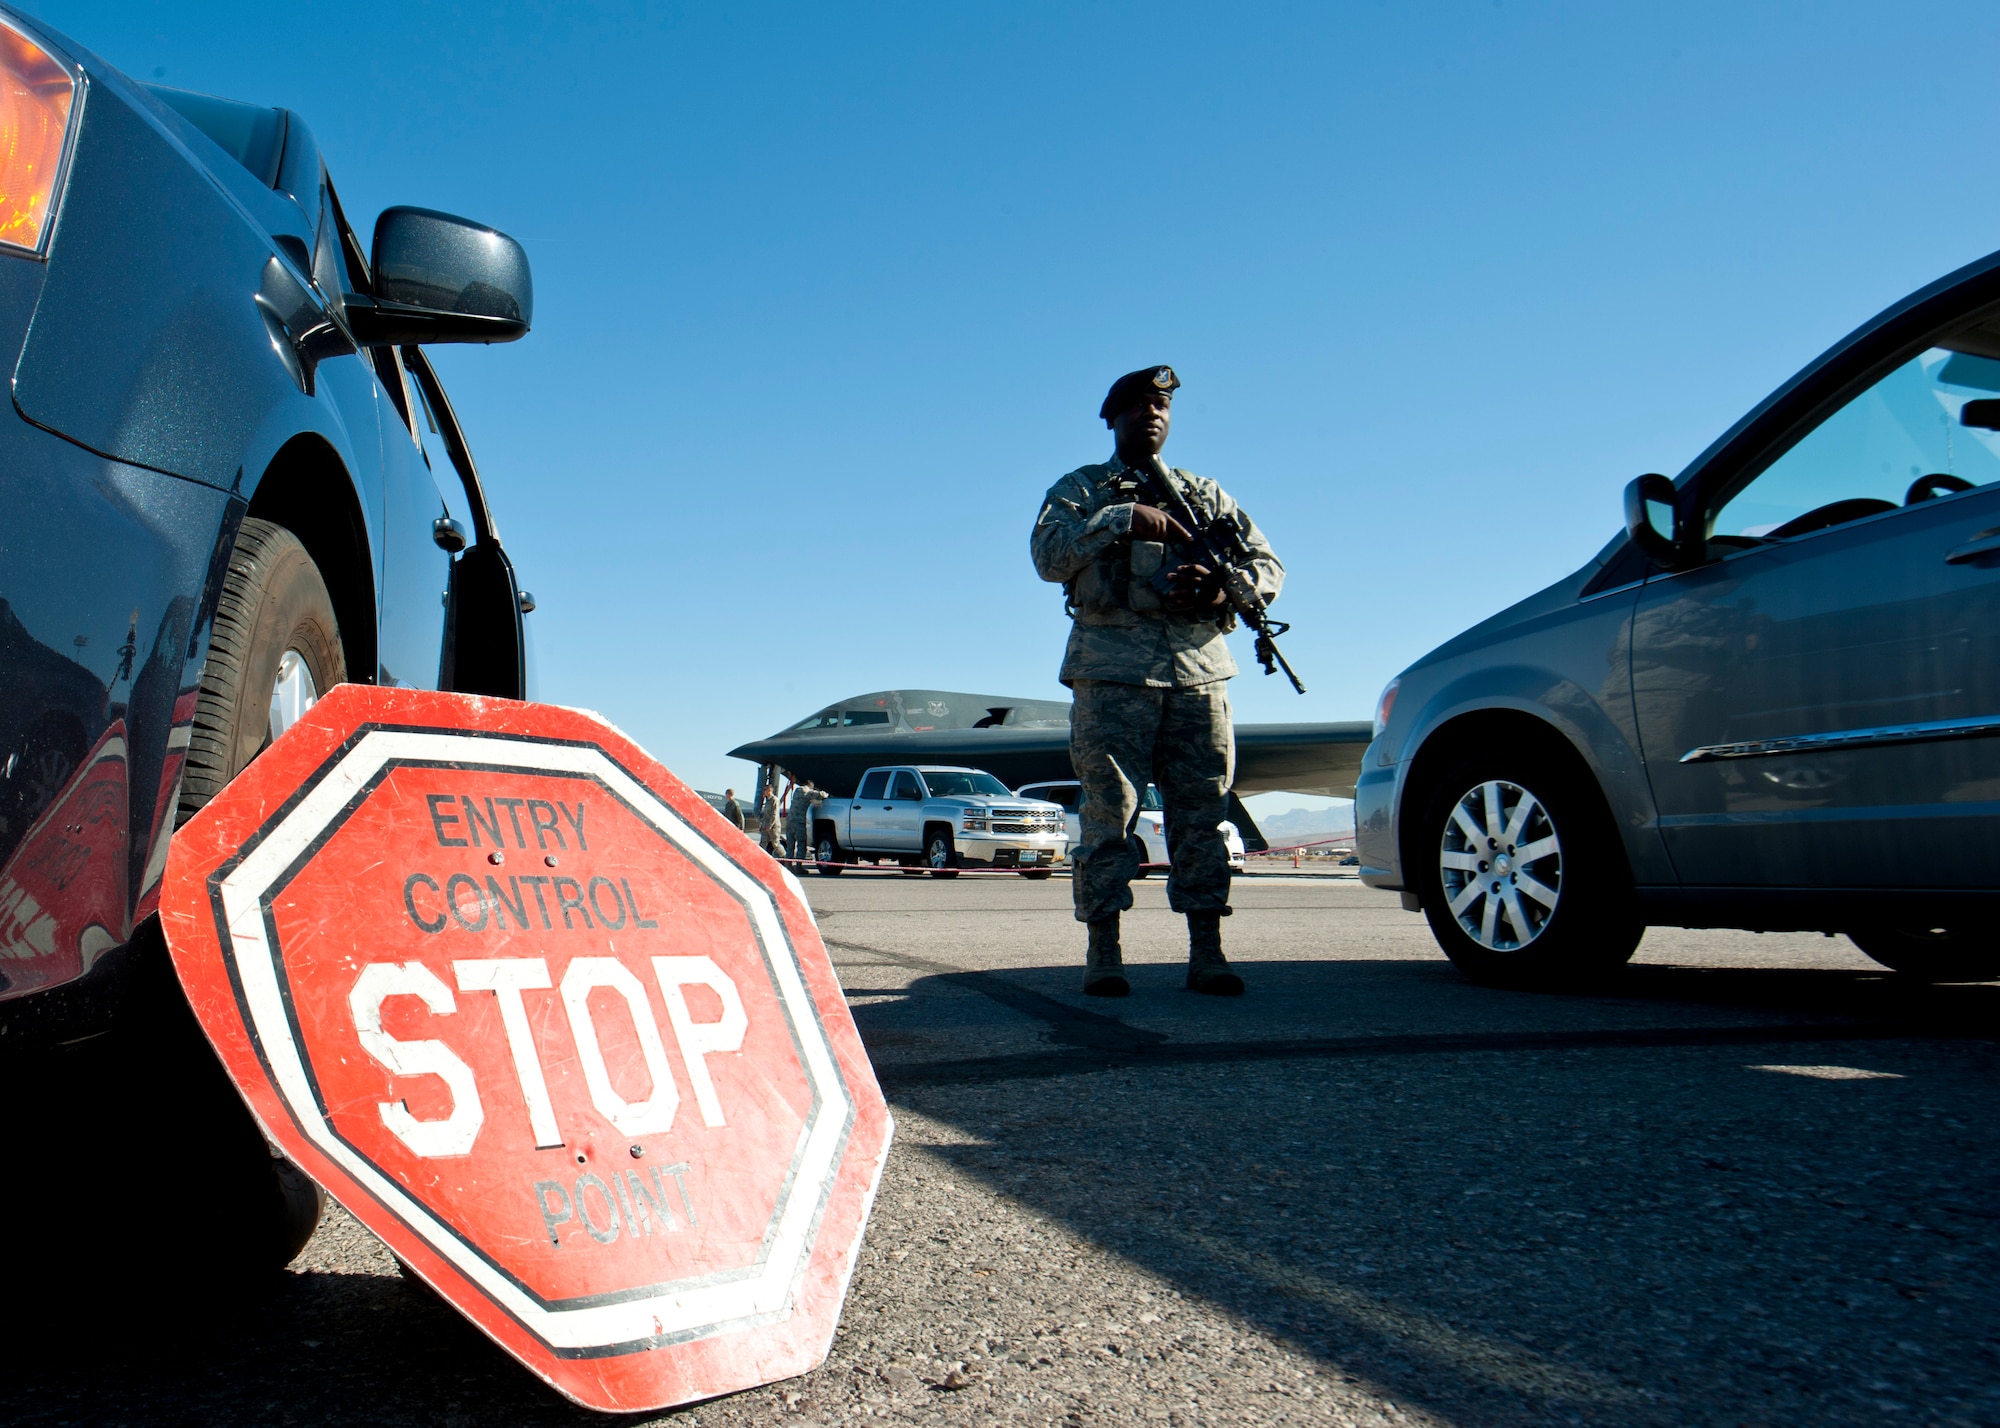 U.S. Air Force Staff Sgt. James Bovain, 509th Security Forces Squadron response force leader from Whiteman Air Force Base, Mo., stands guard at an entry control point on the flightline during Red Flag 14-1 Feb. 10, 2014, at Nellis AFB, Nev. The 13th Bomb Squadron, from Whiteman AFB, brought defenders from their home base since they’re accustomed to the specific guidelines of monitoring the B-2 and surrounding area. (U.S. Air Force photo by Airman 1st Class Thomas Spangler) 